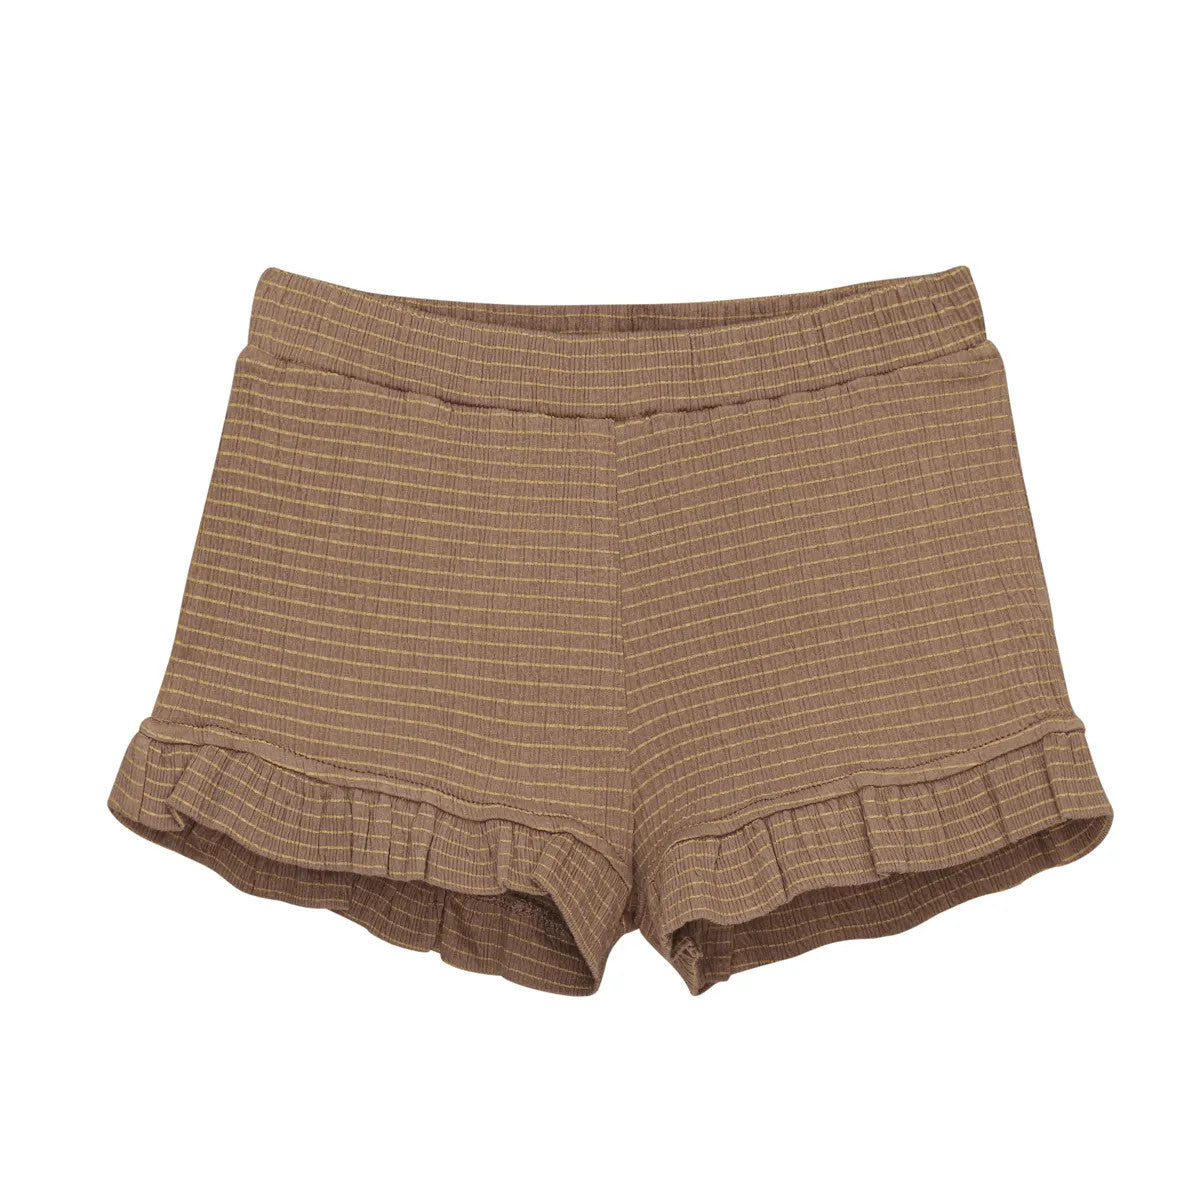 Little Hedonist ruffled short in Café au Lait for girls. Made from organic soft muslin. Sustainable kids clothing.